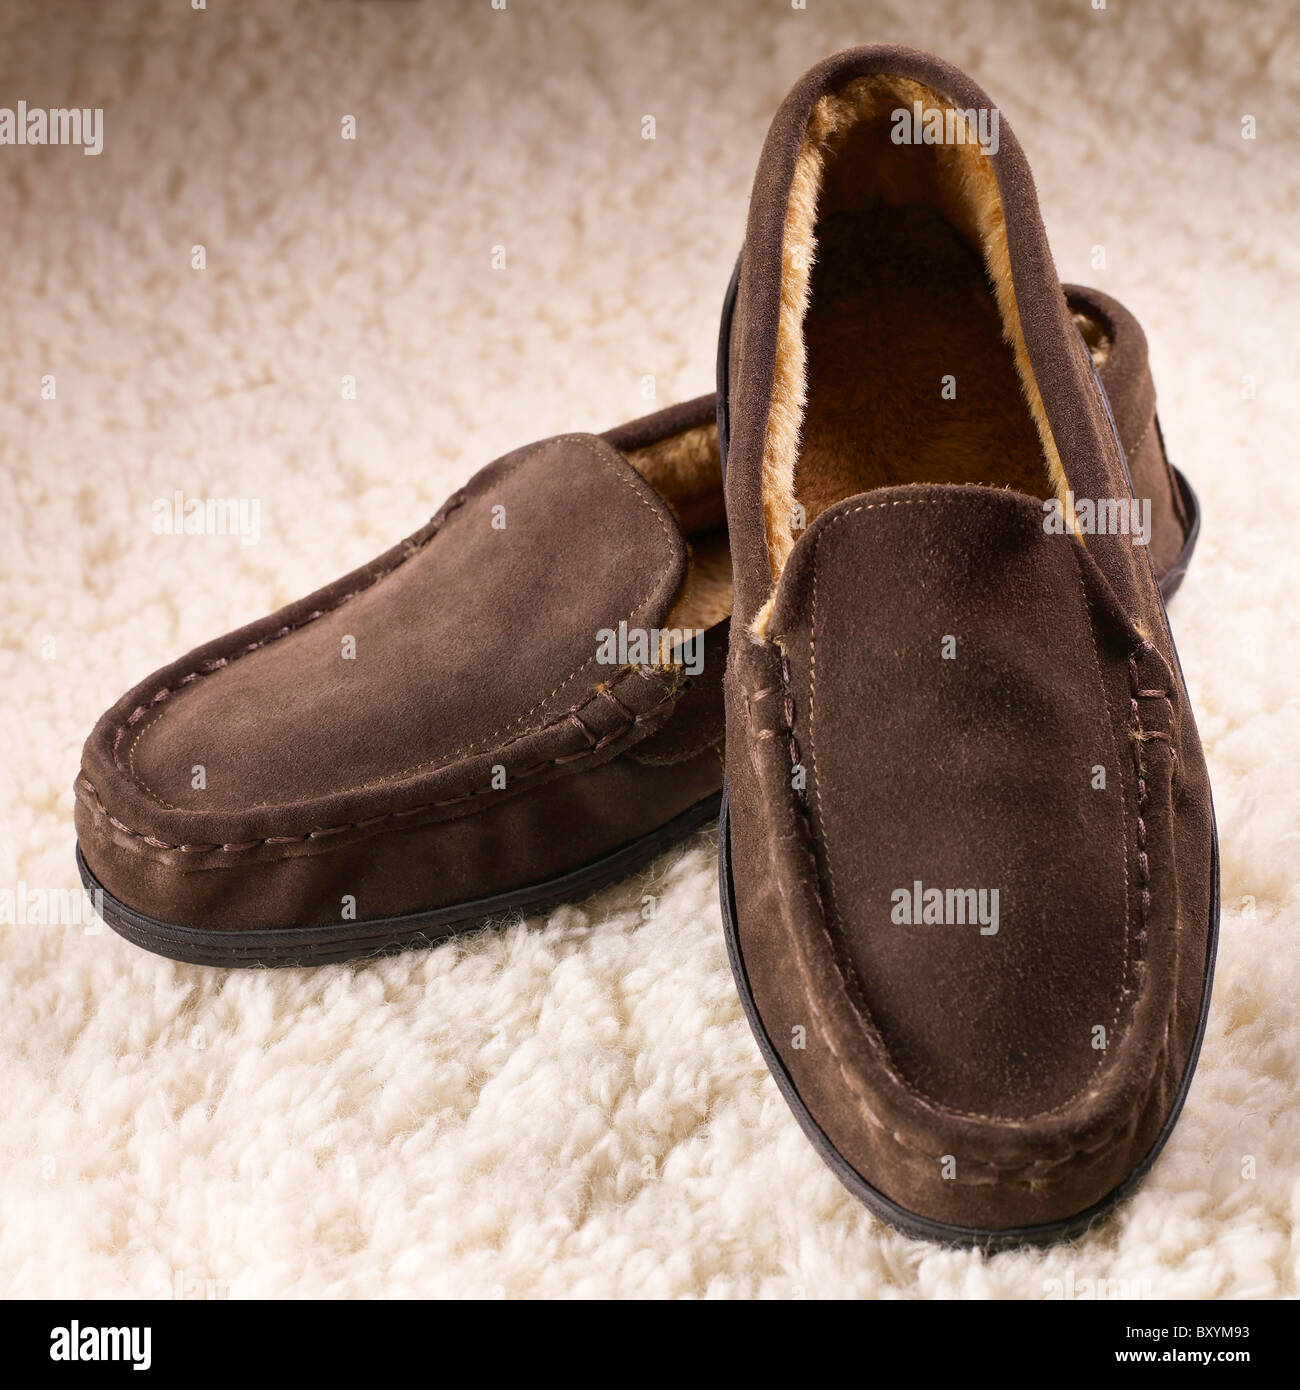 a pair of mens brown slippers shoes on a sheepskin fleece background Stock Photo